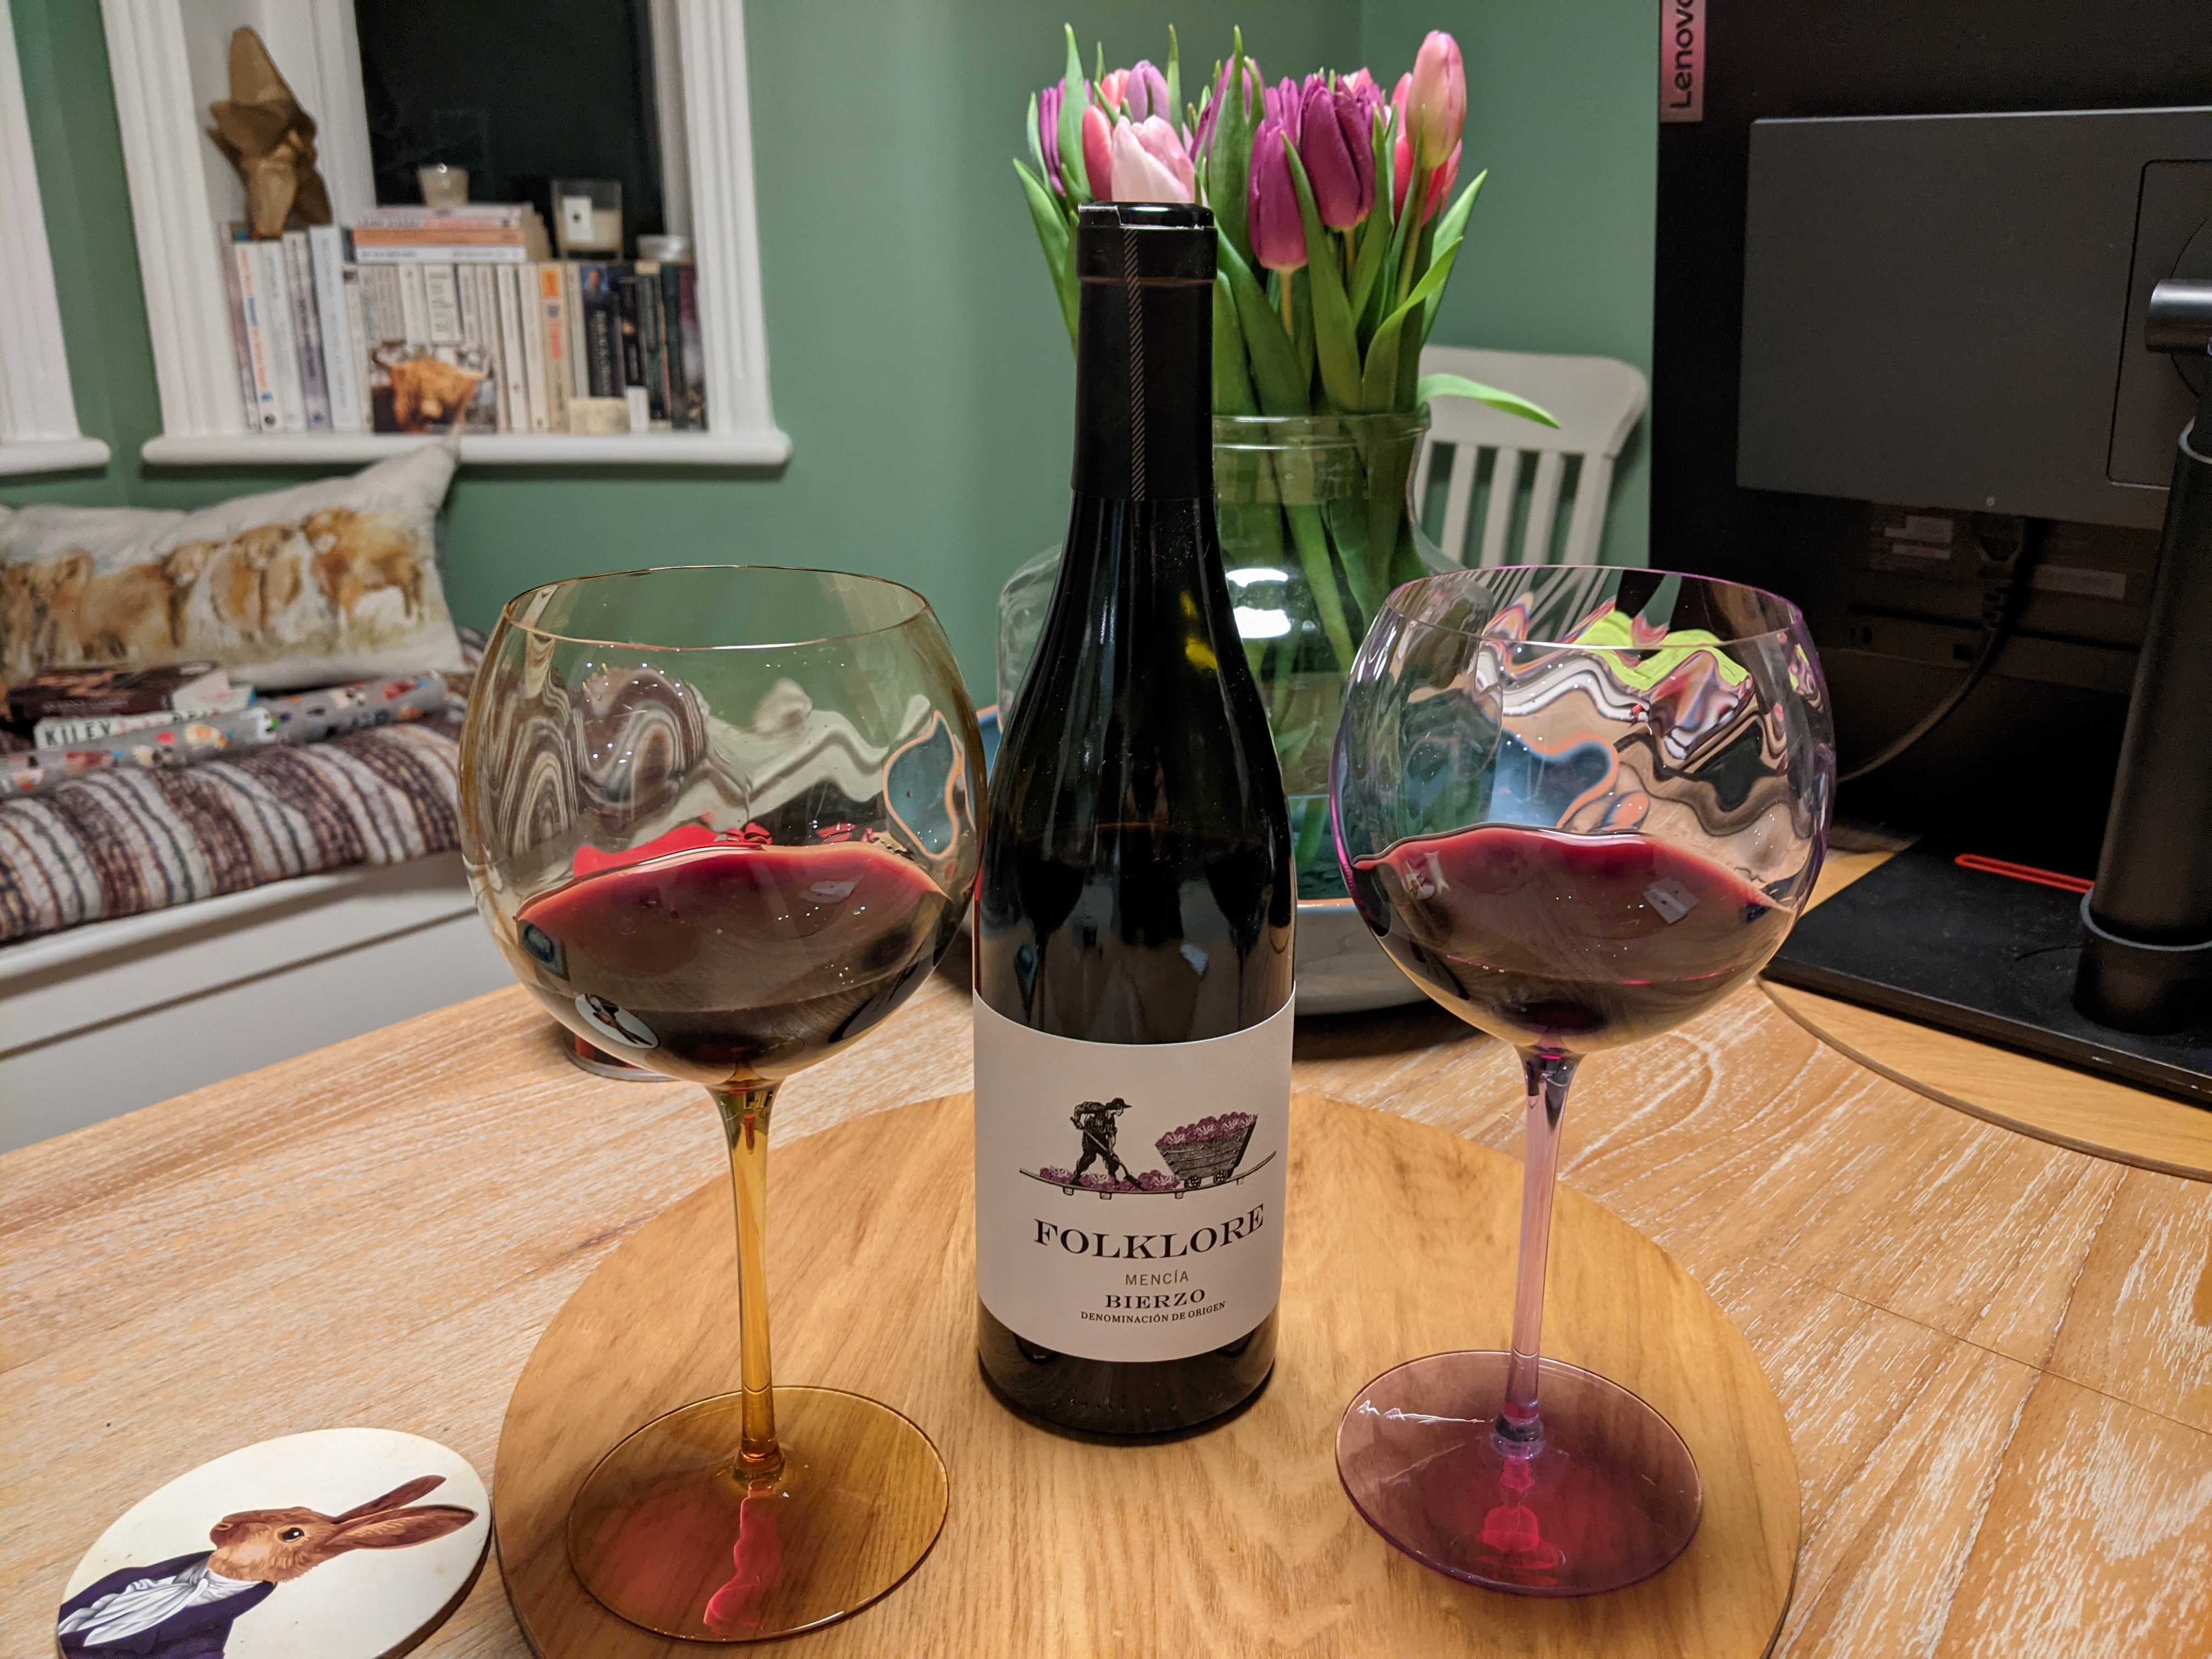 Photograph of a couple of glasses of "Folklore" wine, along with the bottle